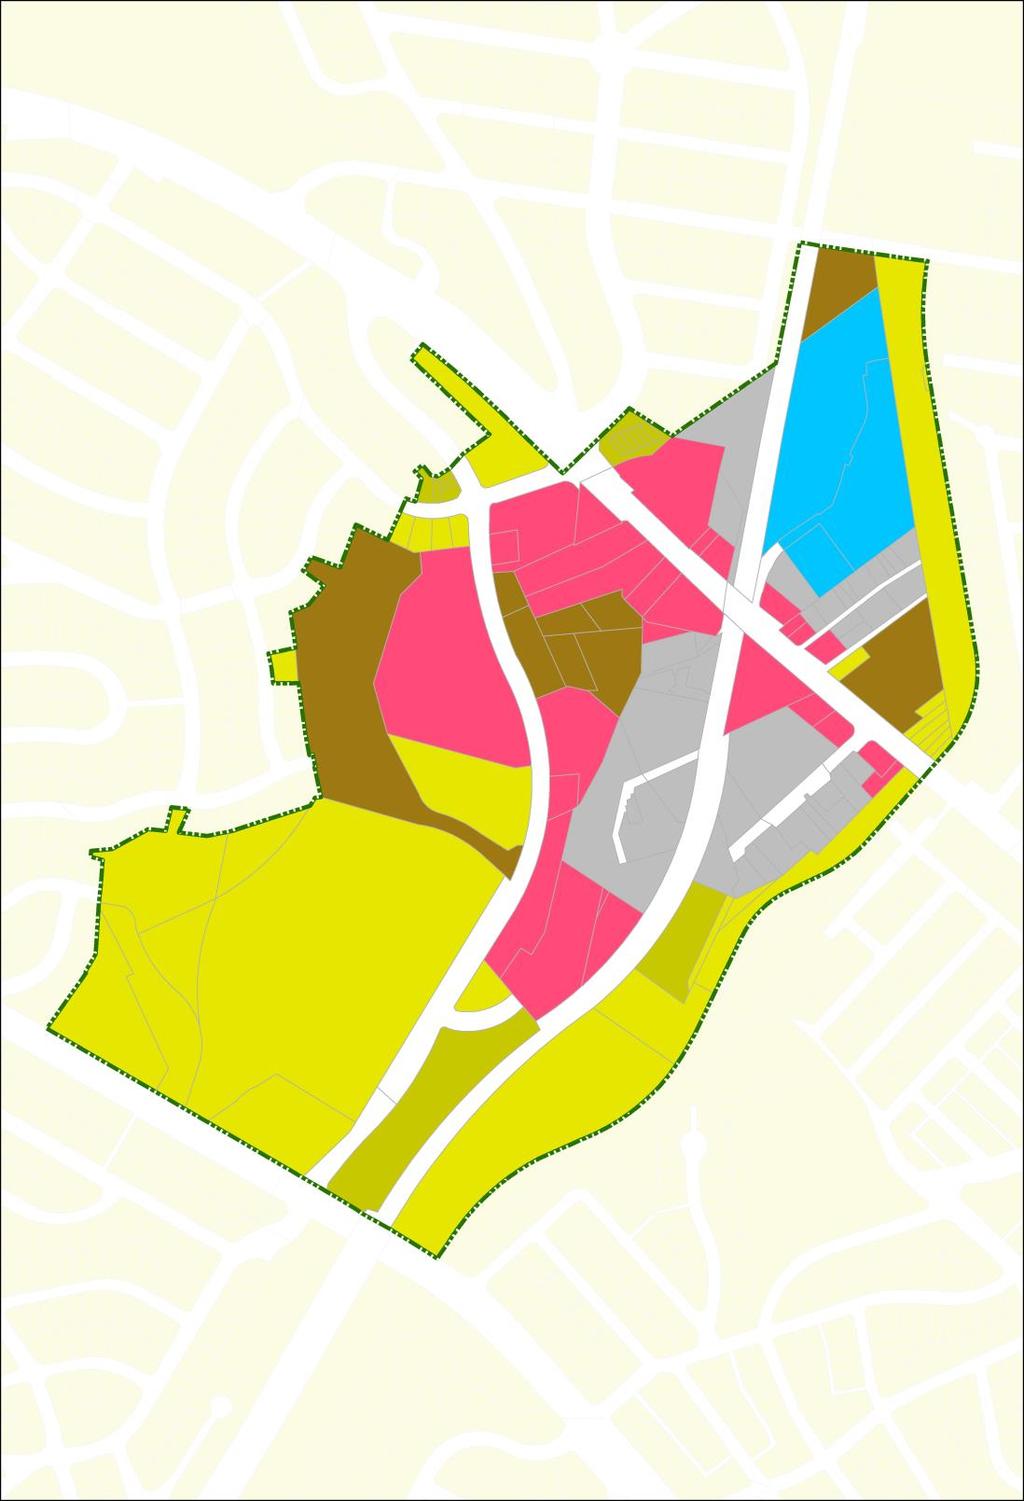 EXISTING ZONING MAP Existing Zones Residential Medium Density R-60 Townhouse RT-8 RT-12.